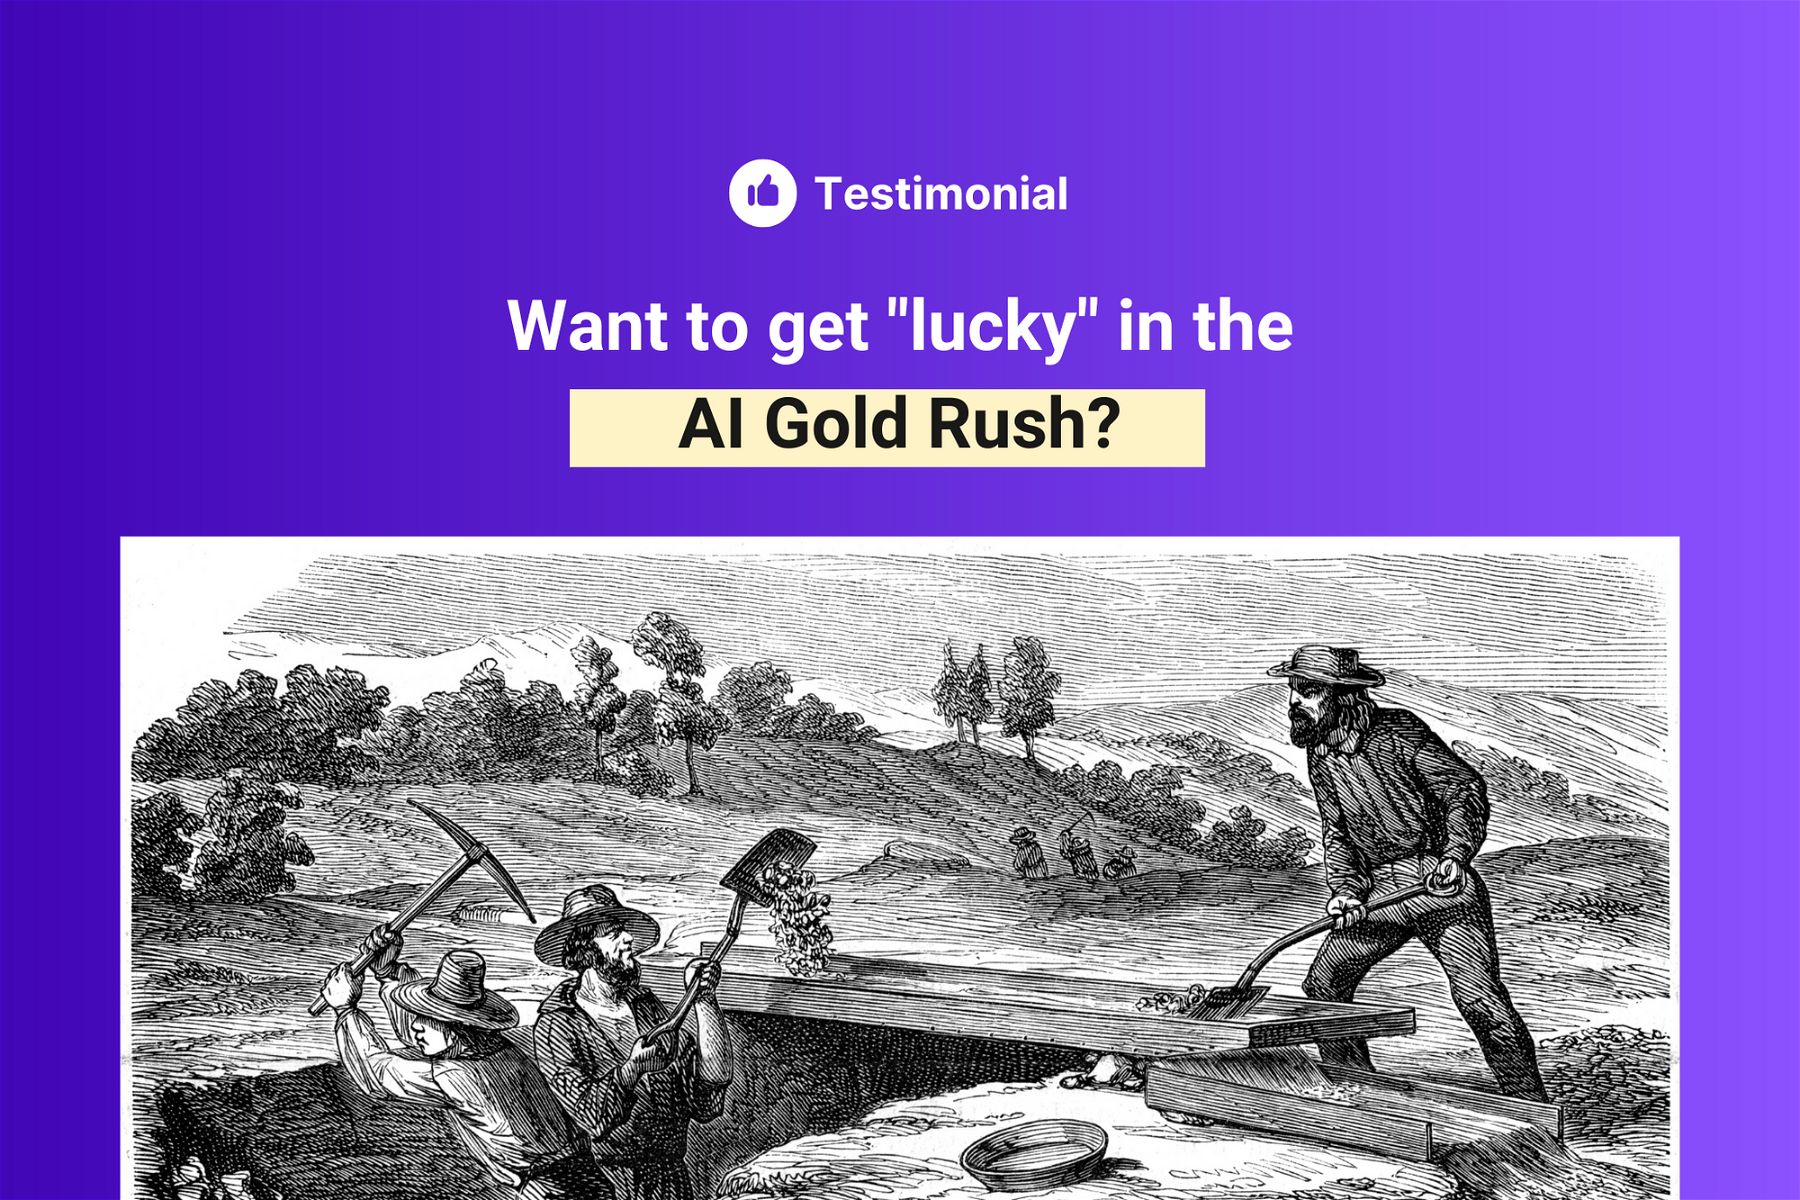 Do You Want To Get “Lucky” During the AI Gold Rush?